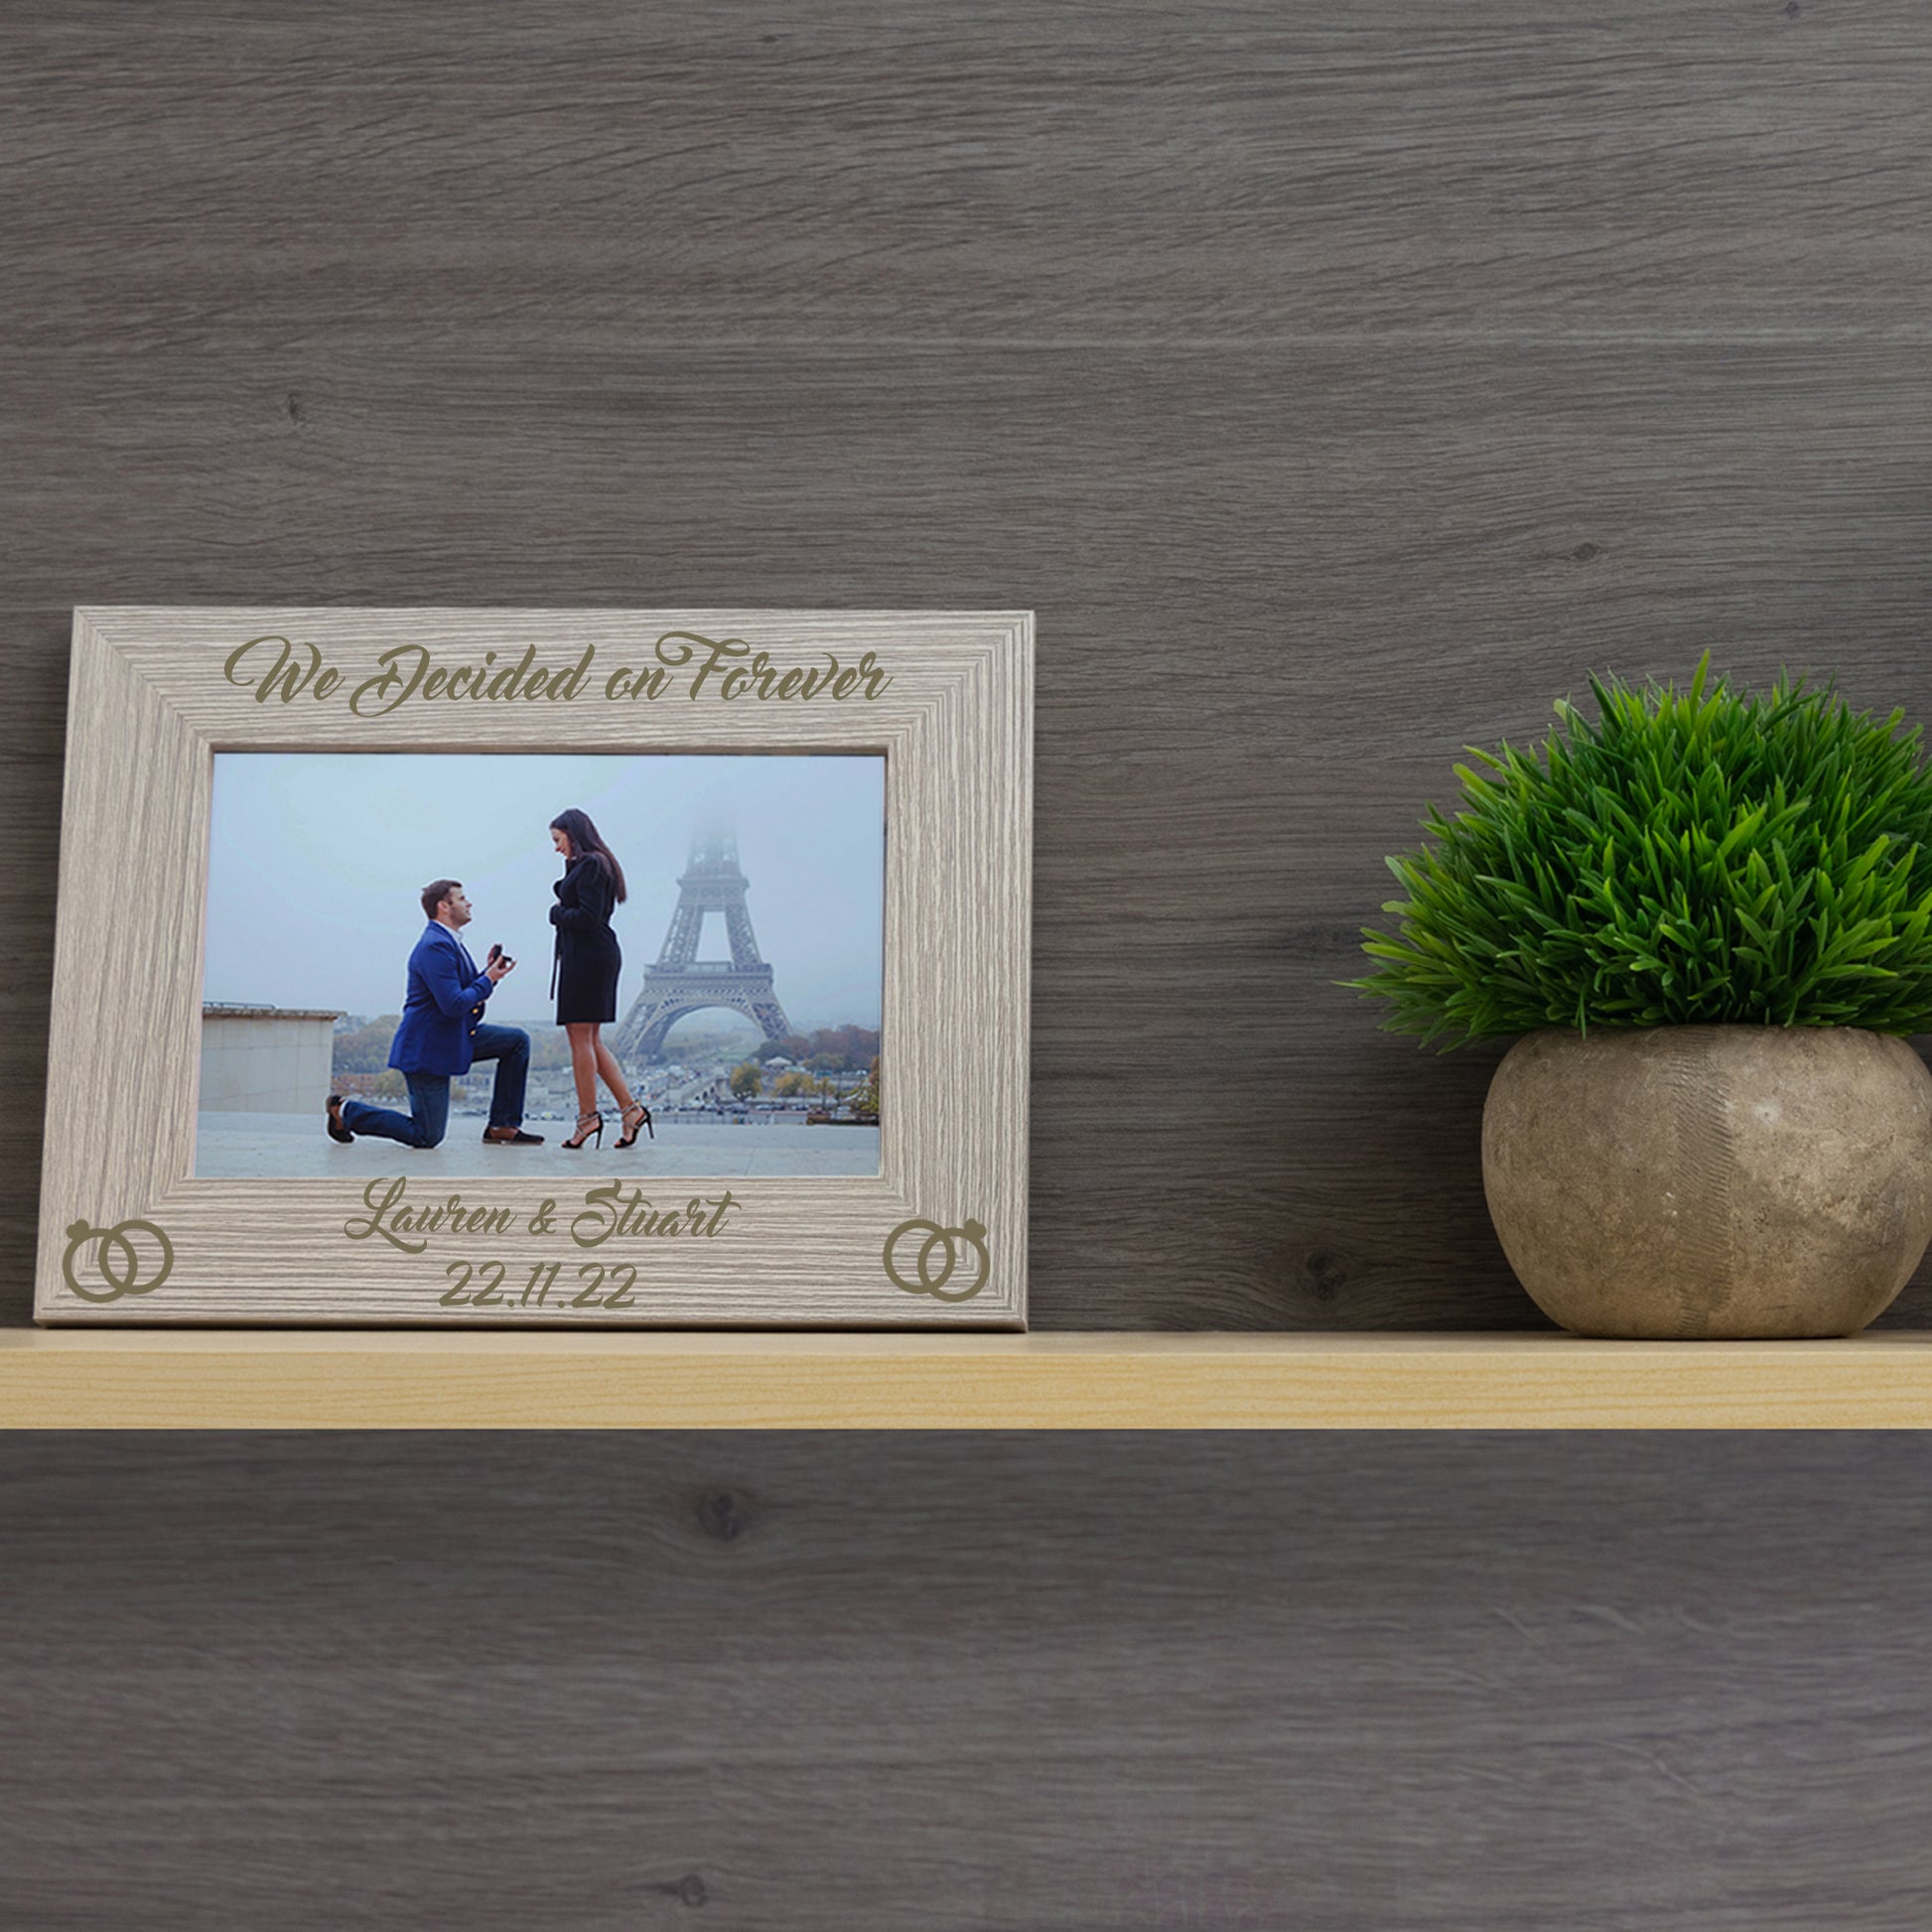 Personalised Wooden Engraved "We Decided on Forever" Engagement Picture Frame  - Always Looking Good -   